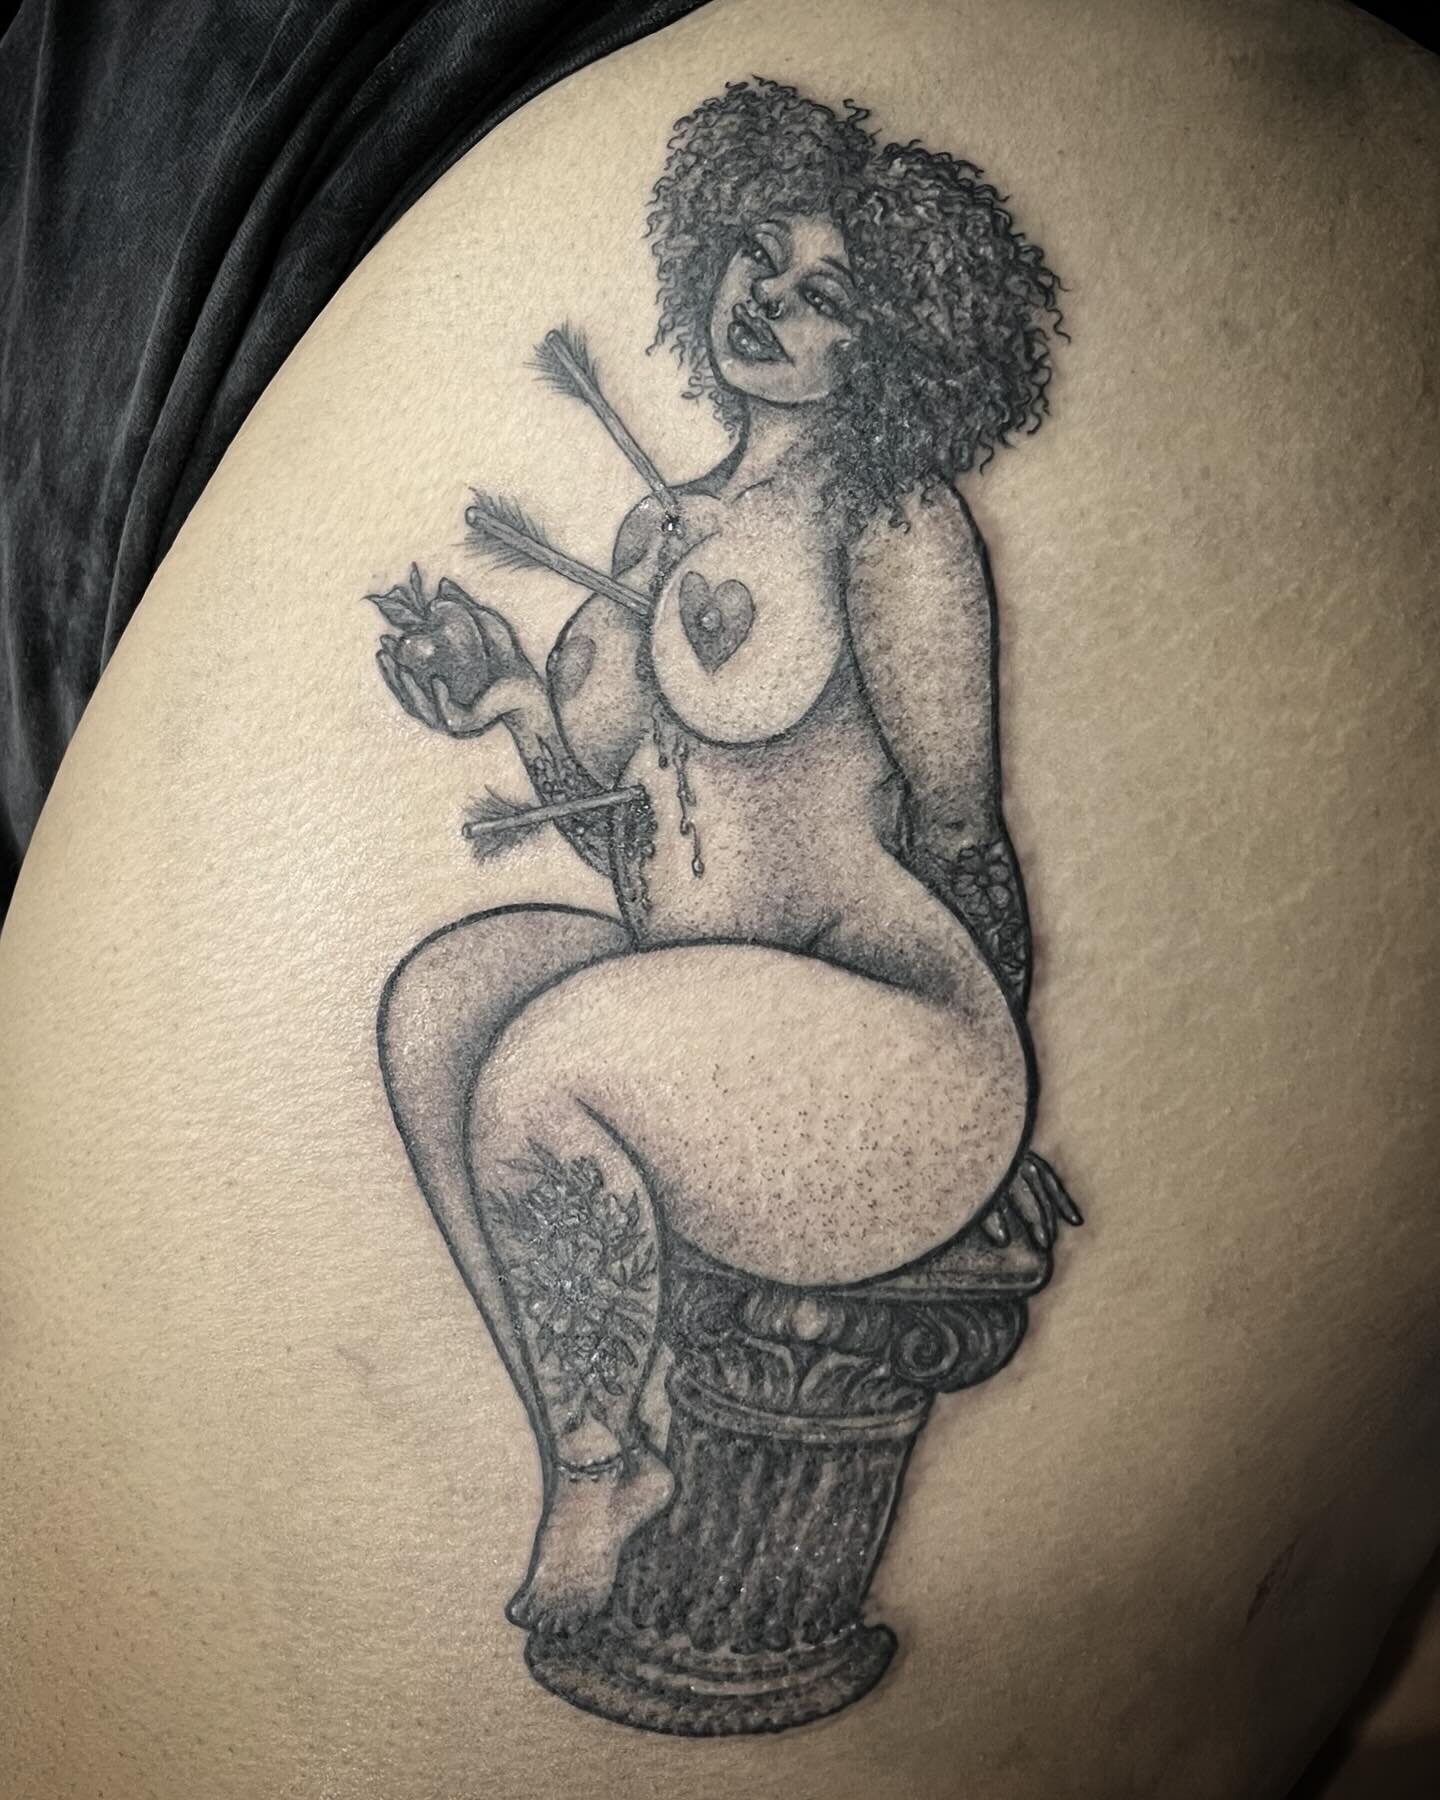 this one was so much fun~ client brought reference, and we made it look like her 💁&zwj;♀️✨
.
.
.
.
.
.
.
.
.
.
#tattoo #girlswithtattoos #curlyhair #curvy #tattoosofinstagram @jerseydeviltattooshop